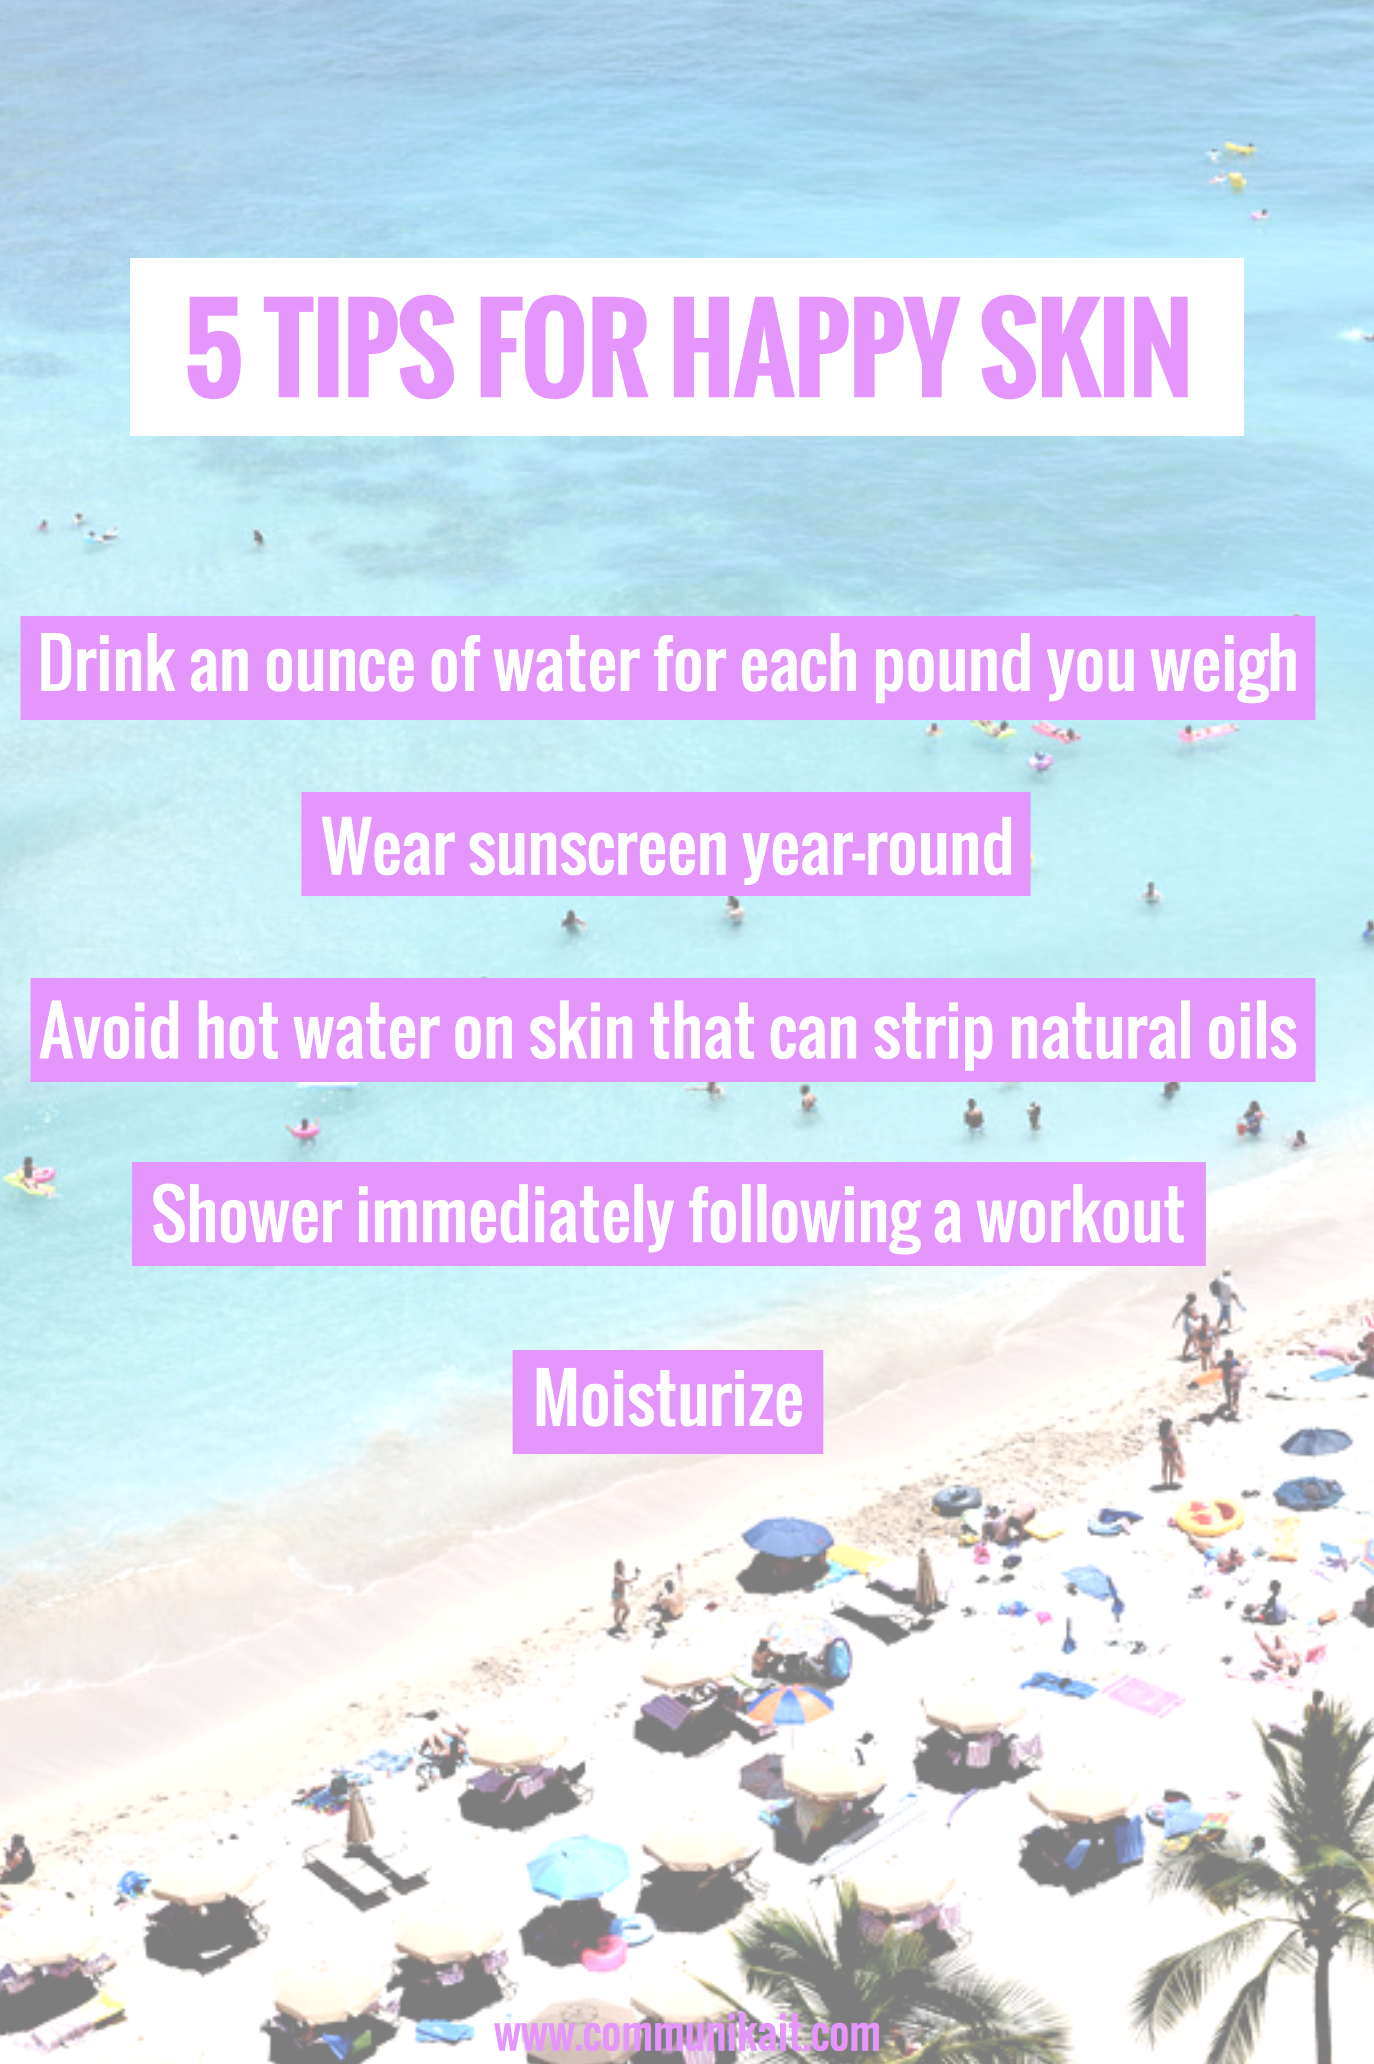 5 Tips For Happy Skin – The Dry Skin Challenge